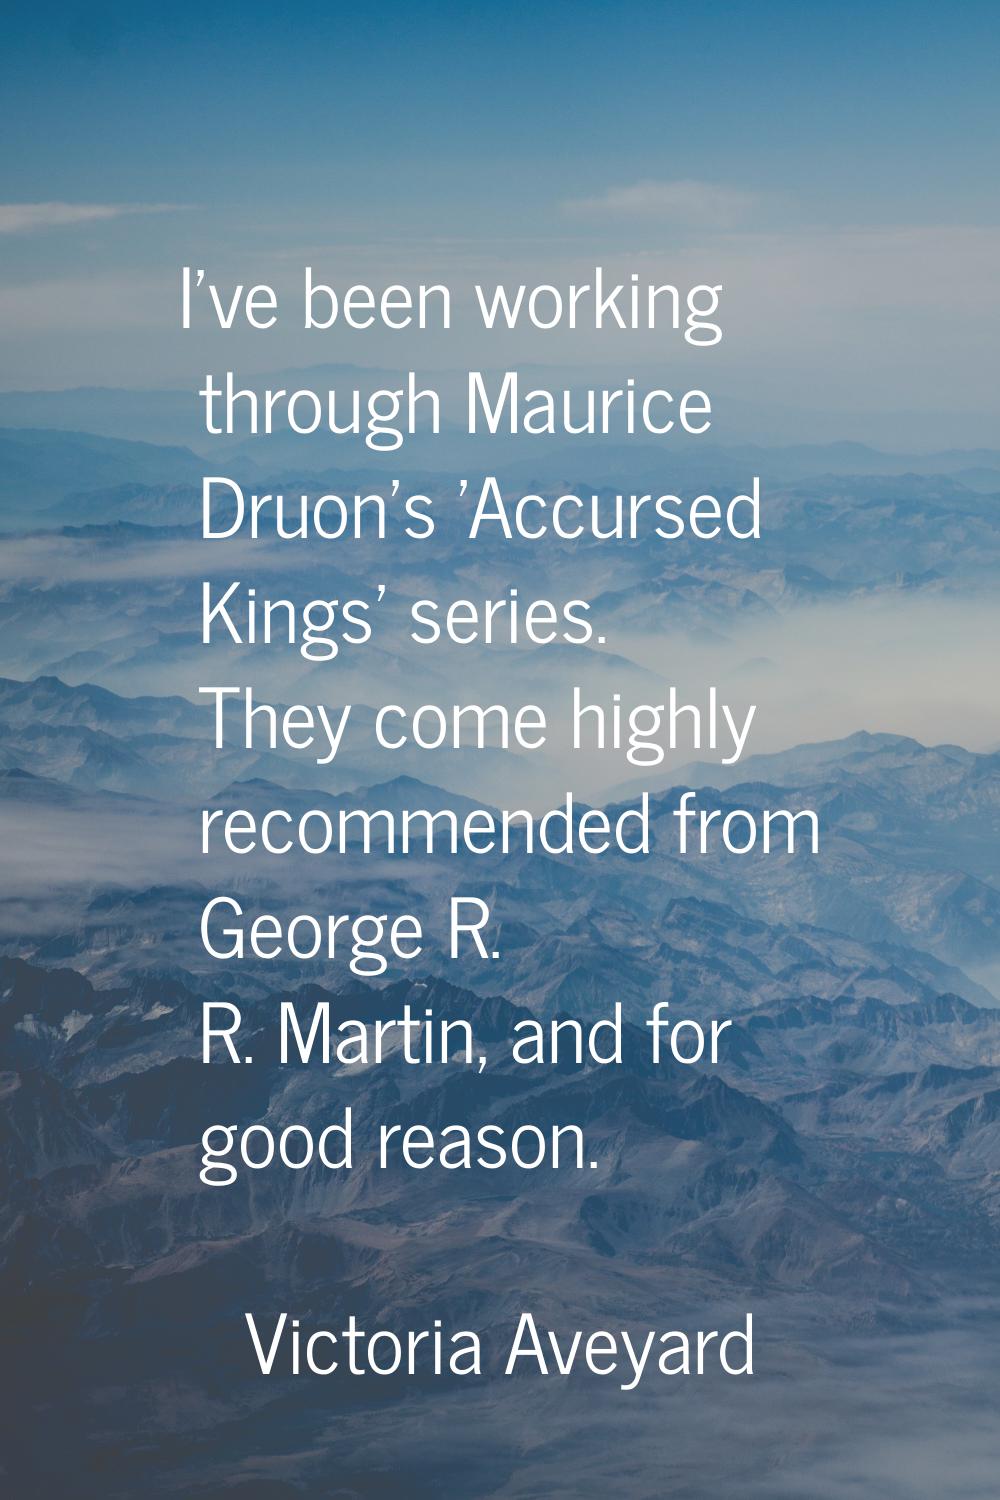 I've been working through Maurice Druon's 'Accursed Kings' series. They come highly recommended fro